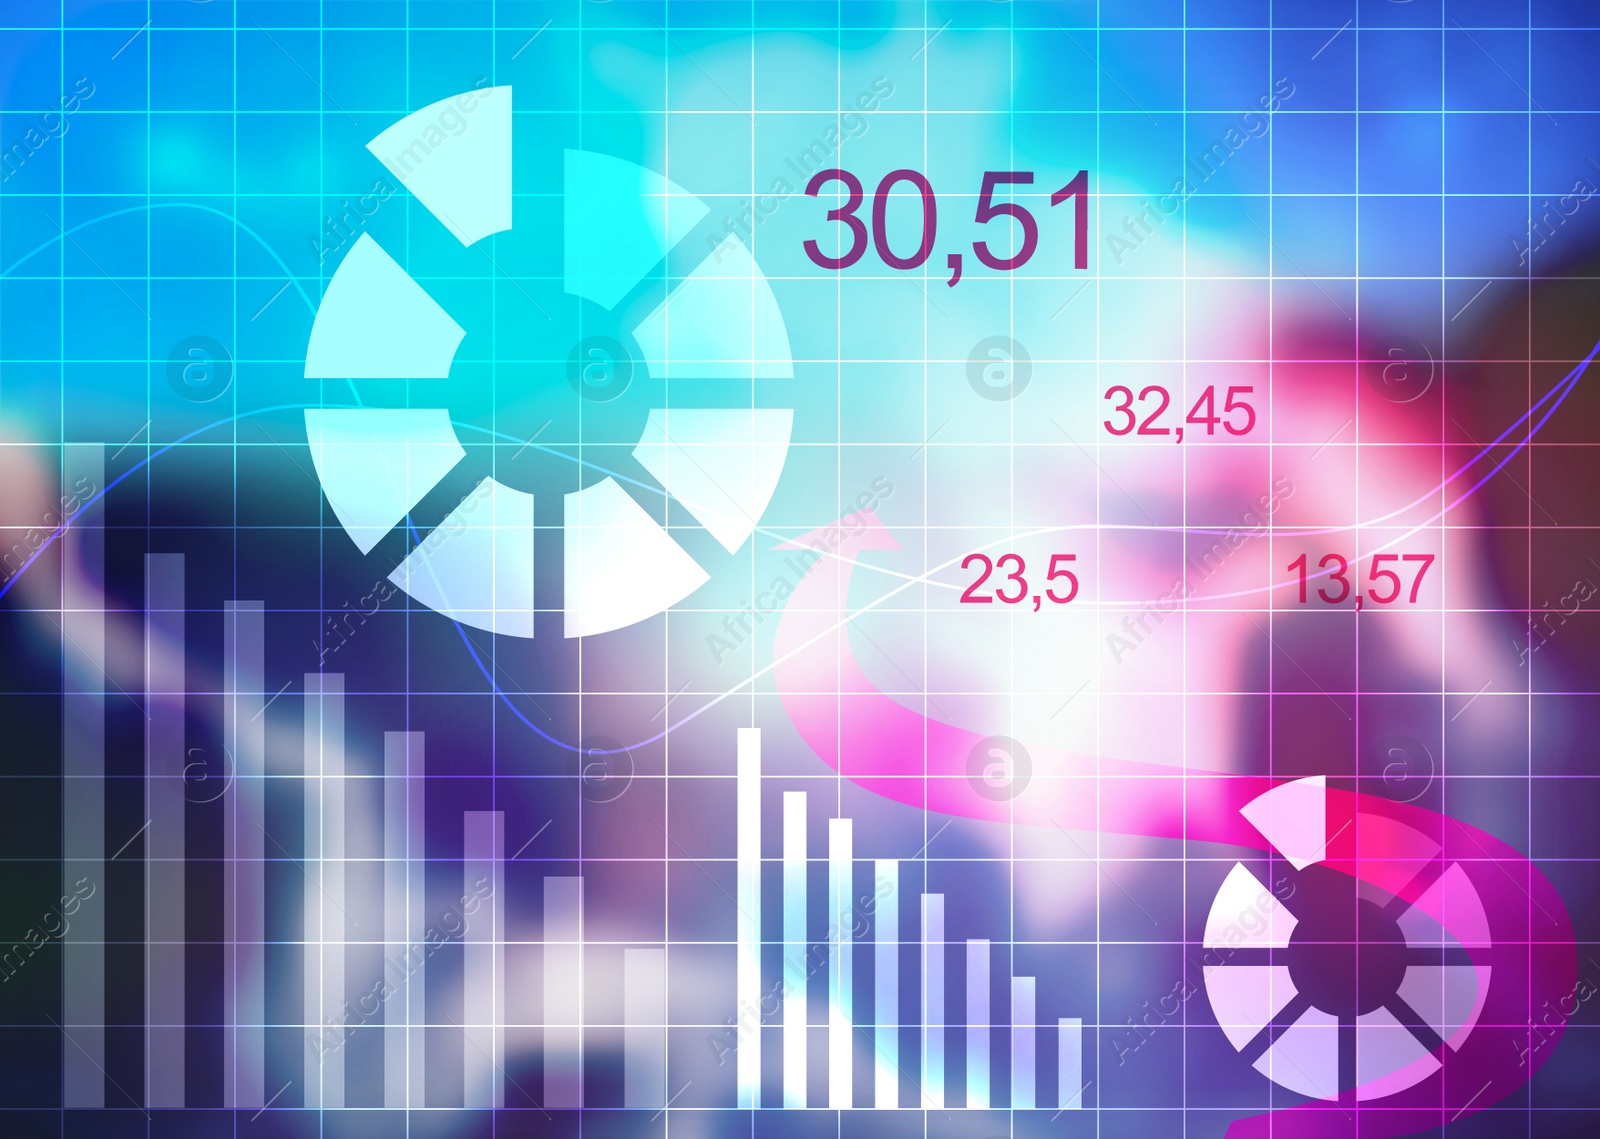 Illustration of Finance trading concept. Digital charts with statistic information on blurred background